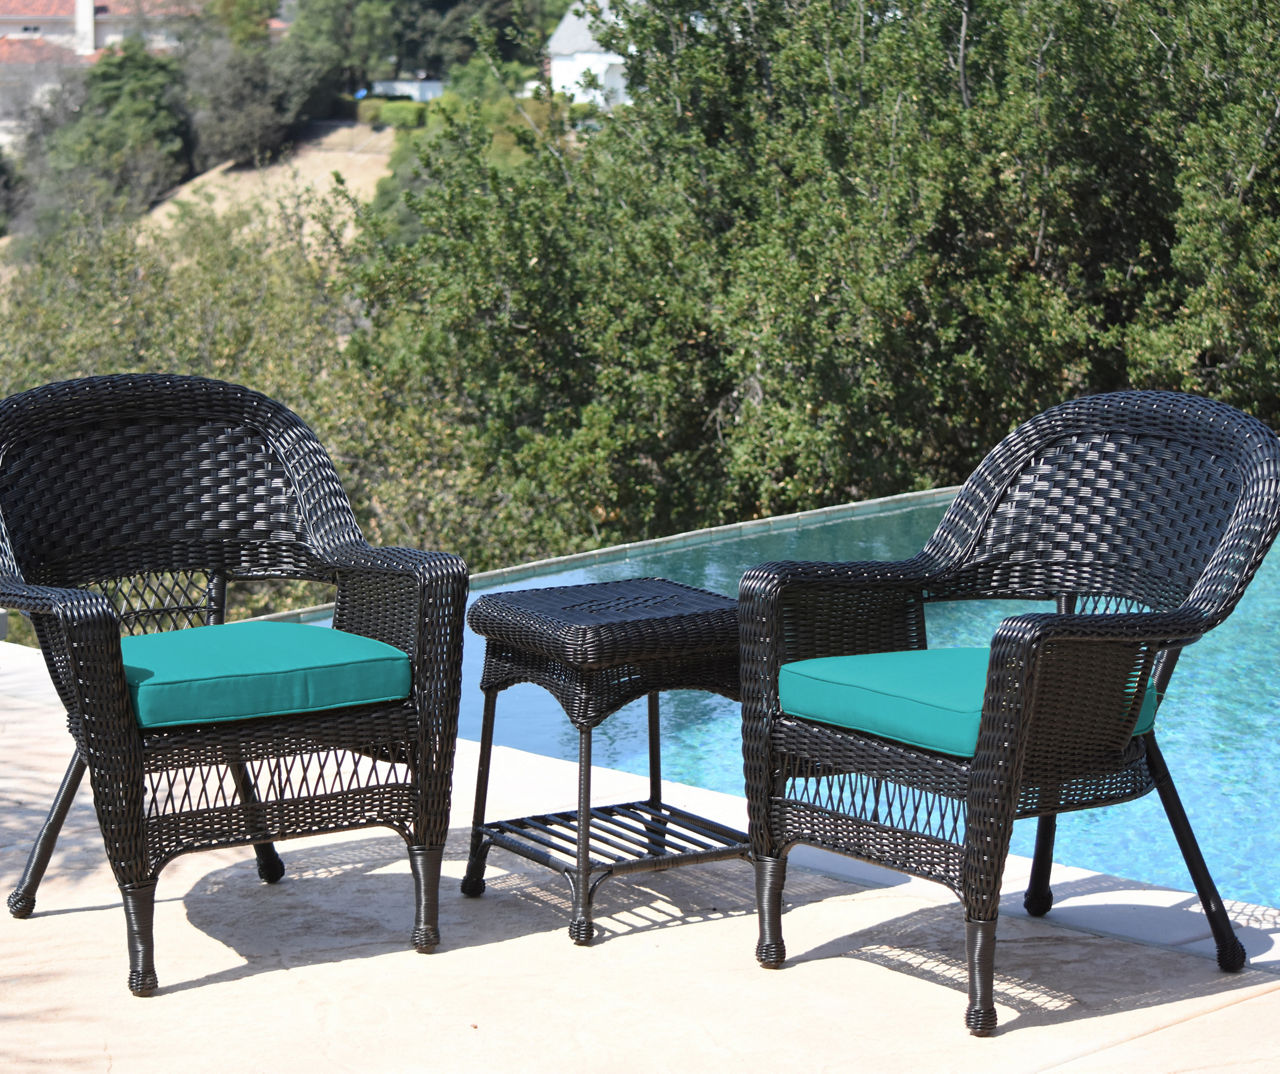 Black 3-Piece Patio All-Weather Wicker Chat Set with Turquoise Cushions